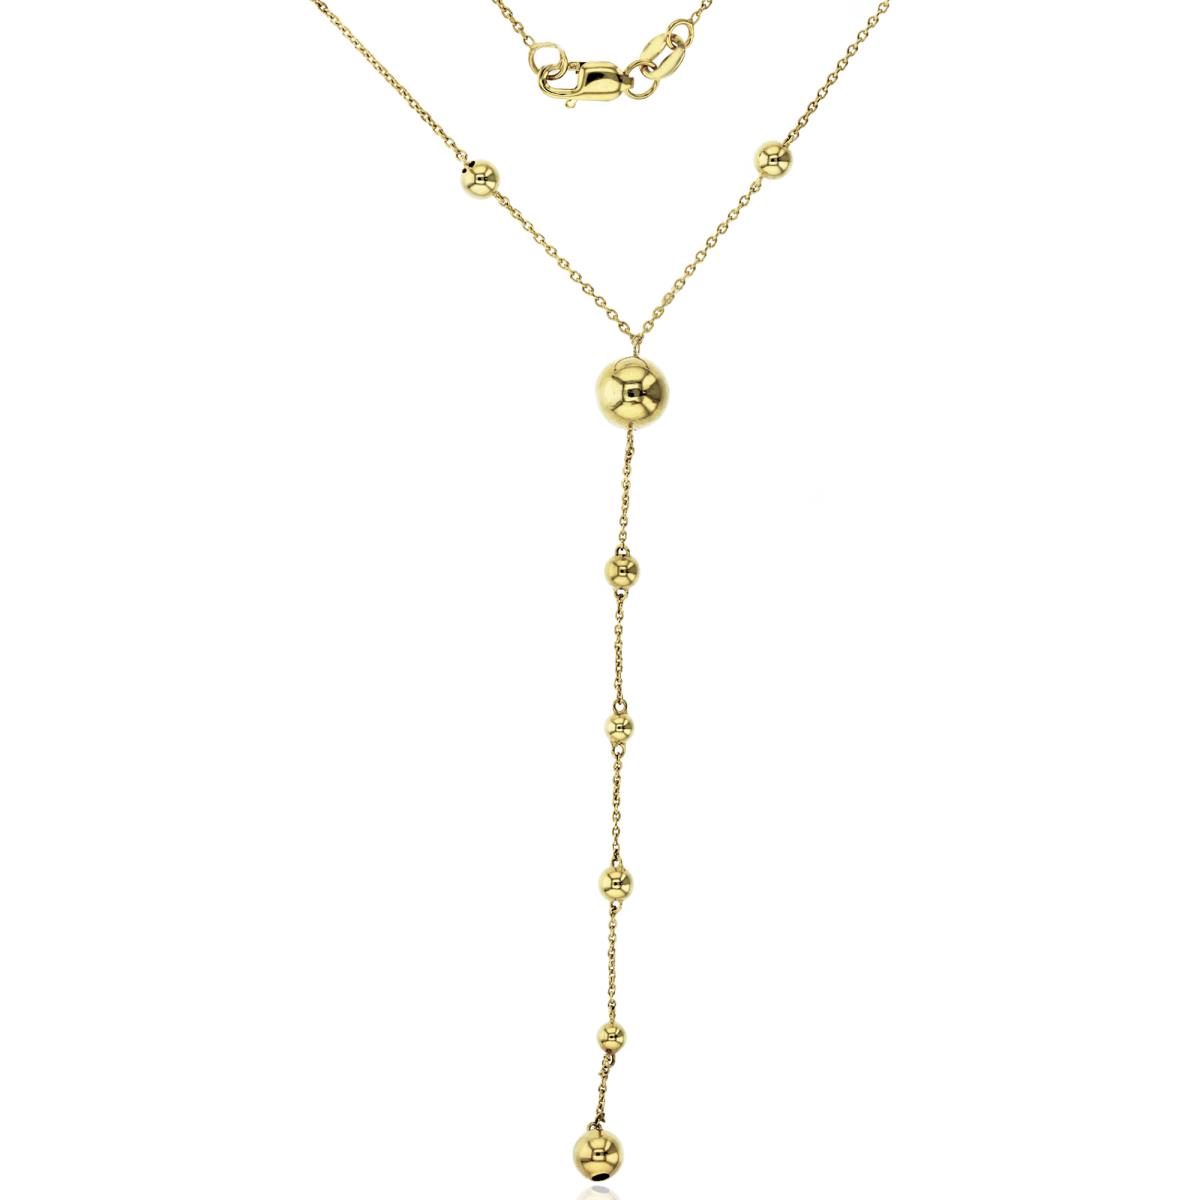 10K Yellow Gold Dangling Ball & Chain 17" Necklace